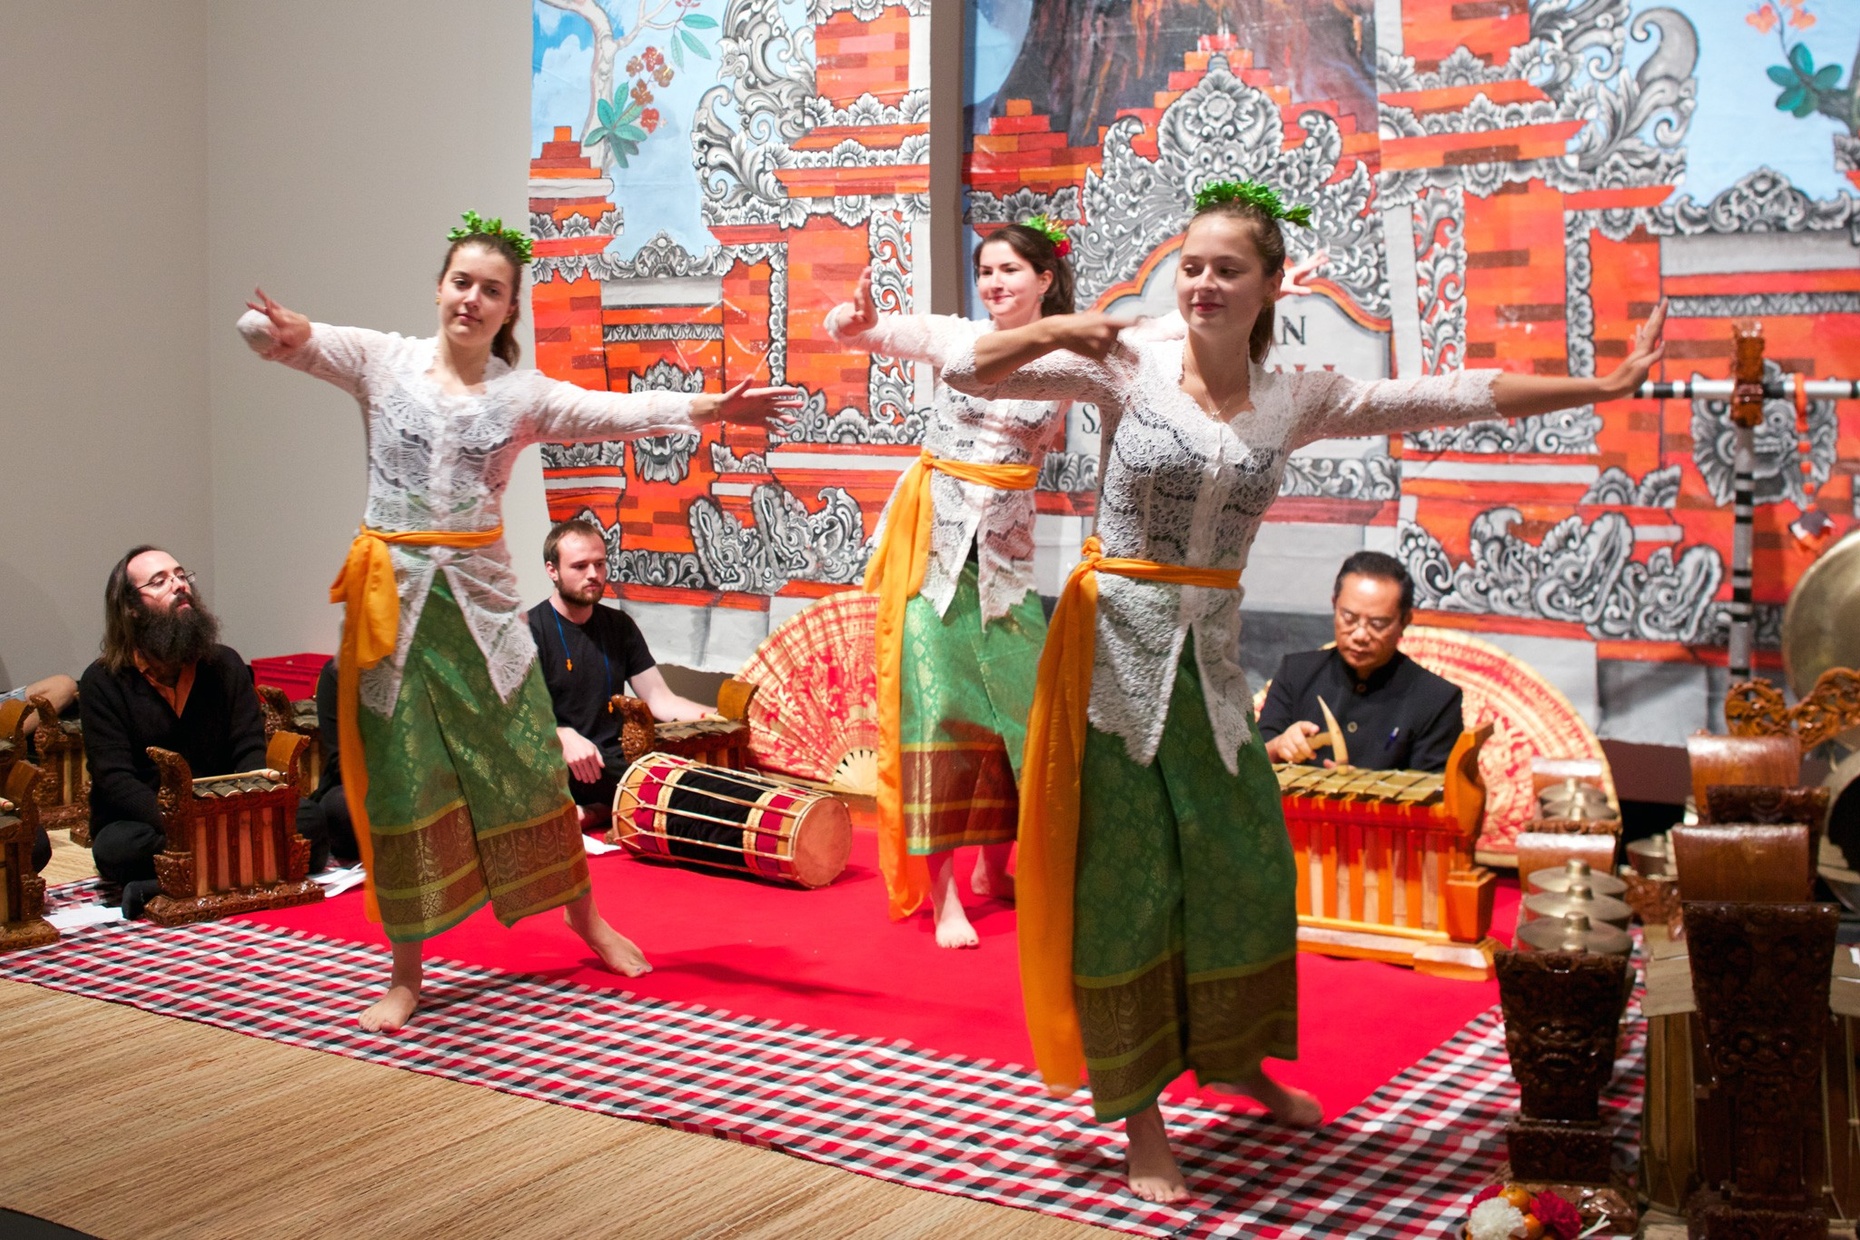 Three, light-skinned, female dancers in oriental-style clothing posing on a red rug with different small instruments lined up behind and around them. A tanned, Asian man sits playing a xylophone type instrument behind the dancers in front  of elaborate wall hangings depicting a red temple.